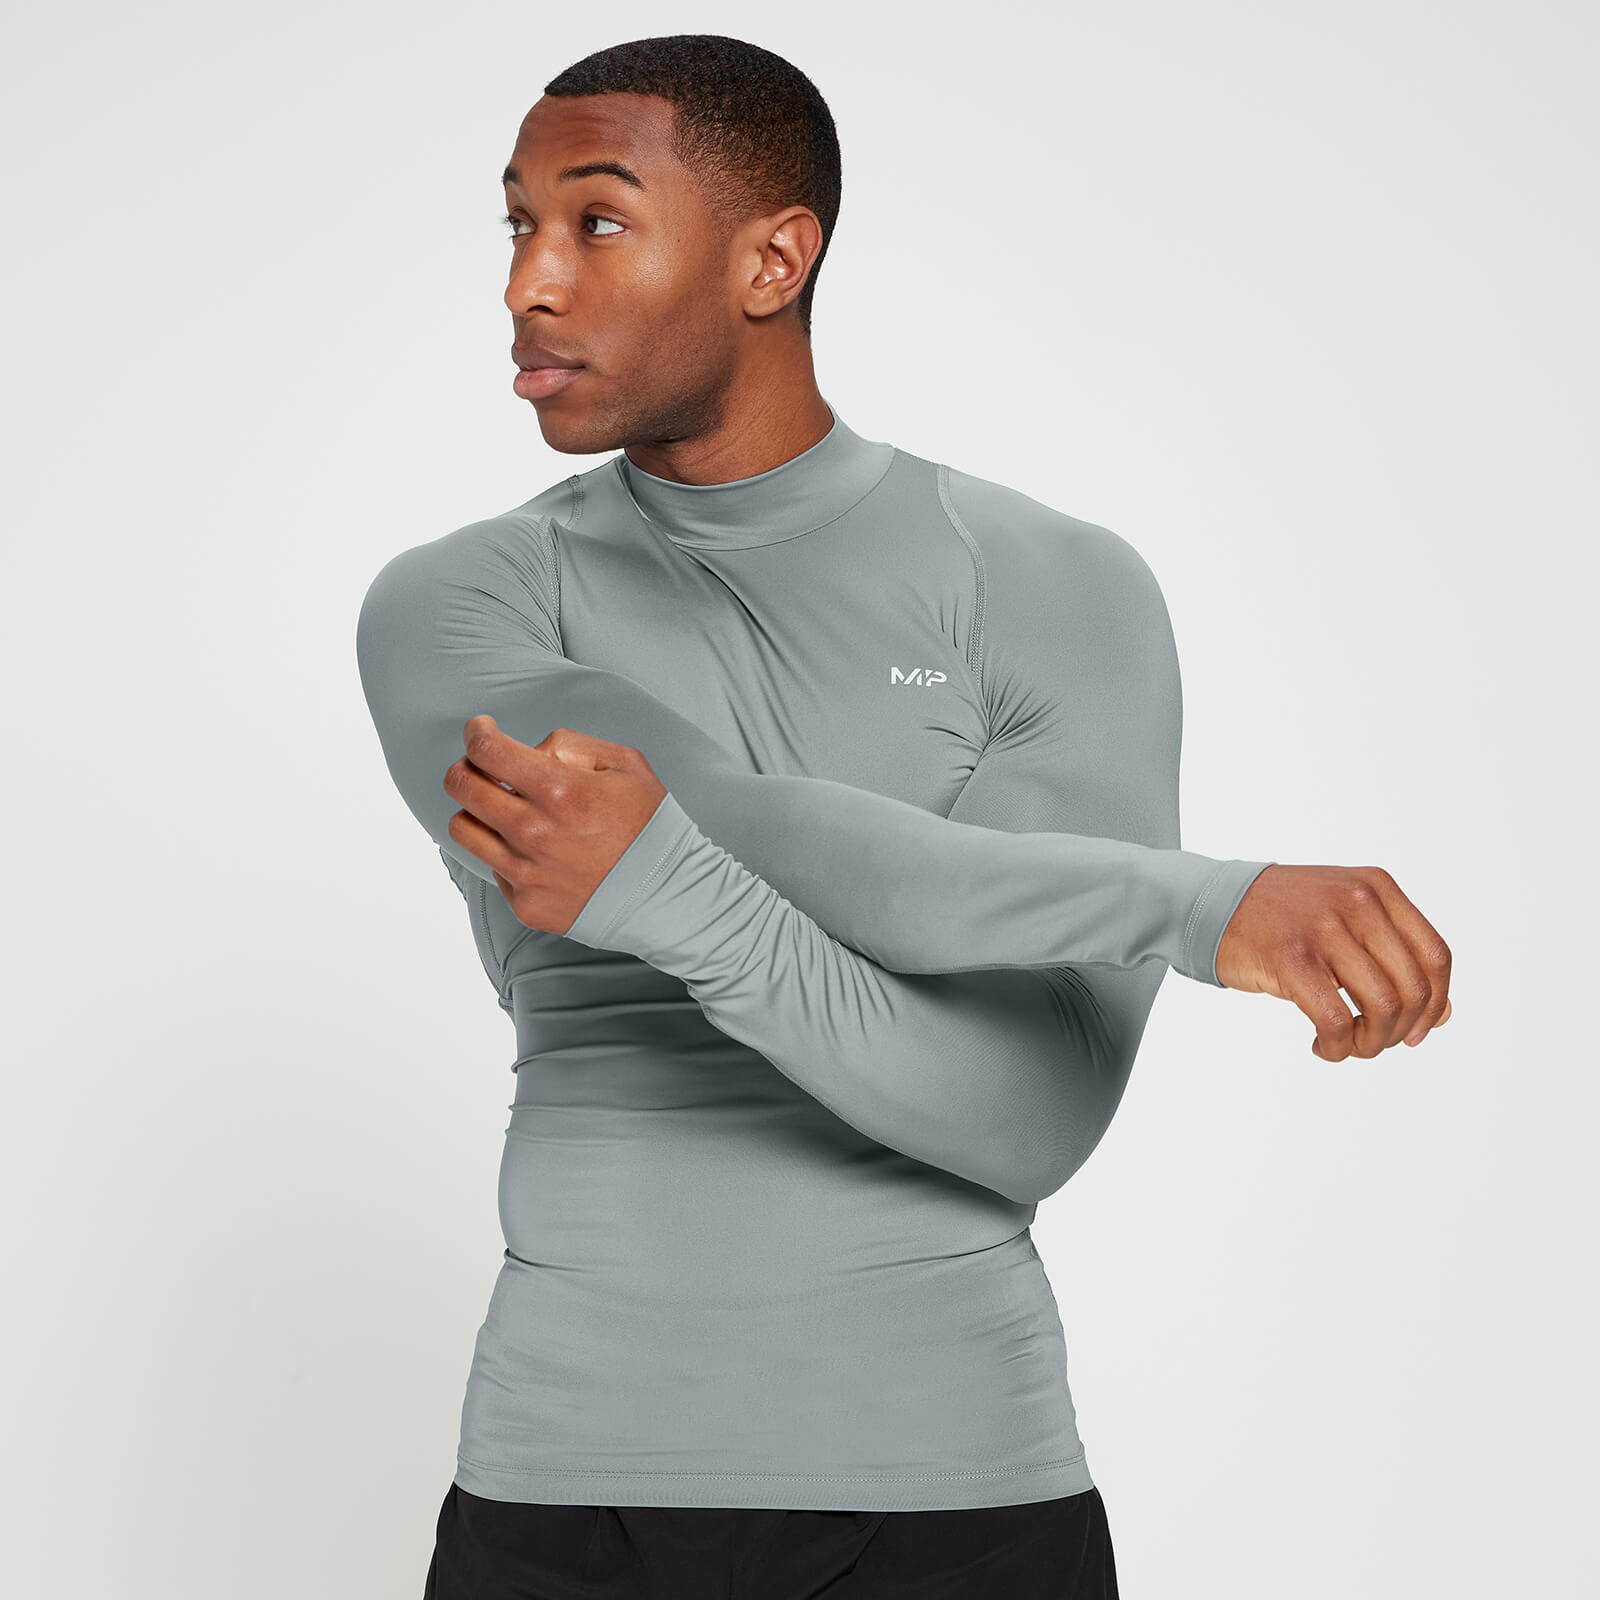 MP Men's Training Base Layer High Neck Long Sleeve Top - Storm - L